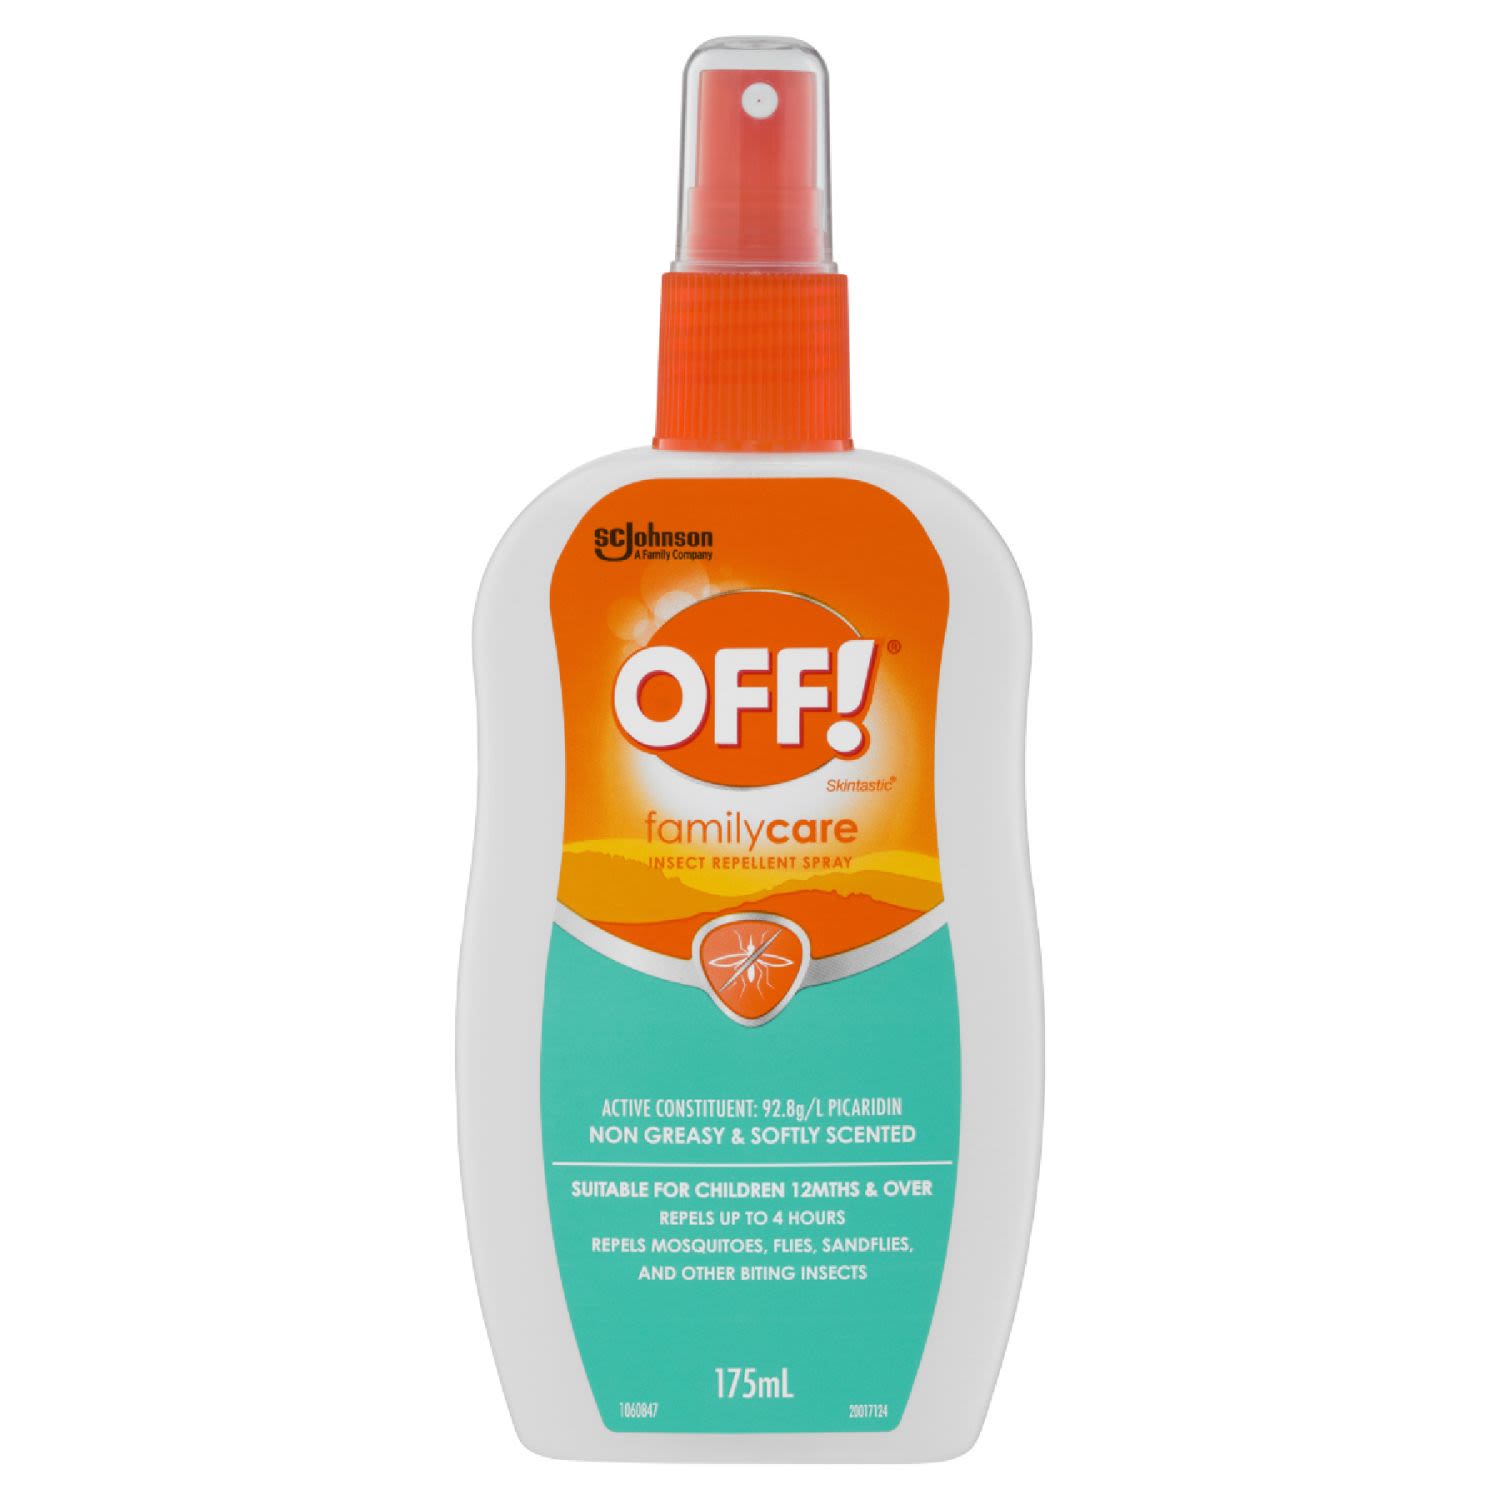 Off! Family Care Insect Repellent Spray, 175 Millilitre